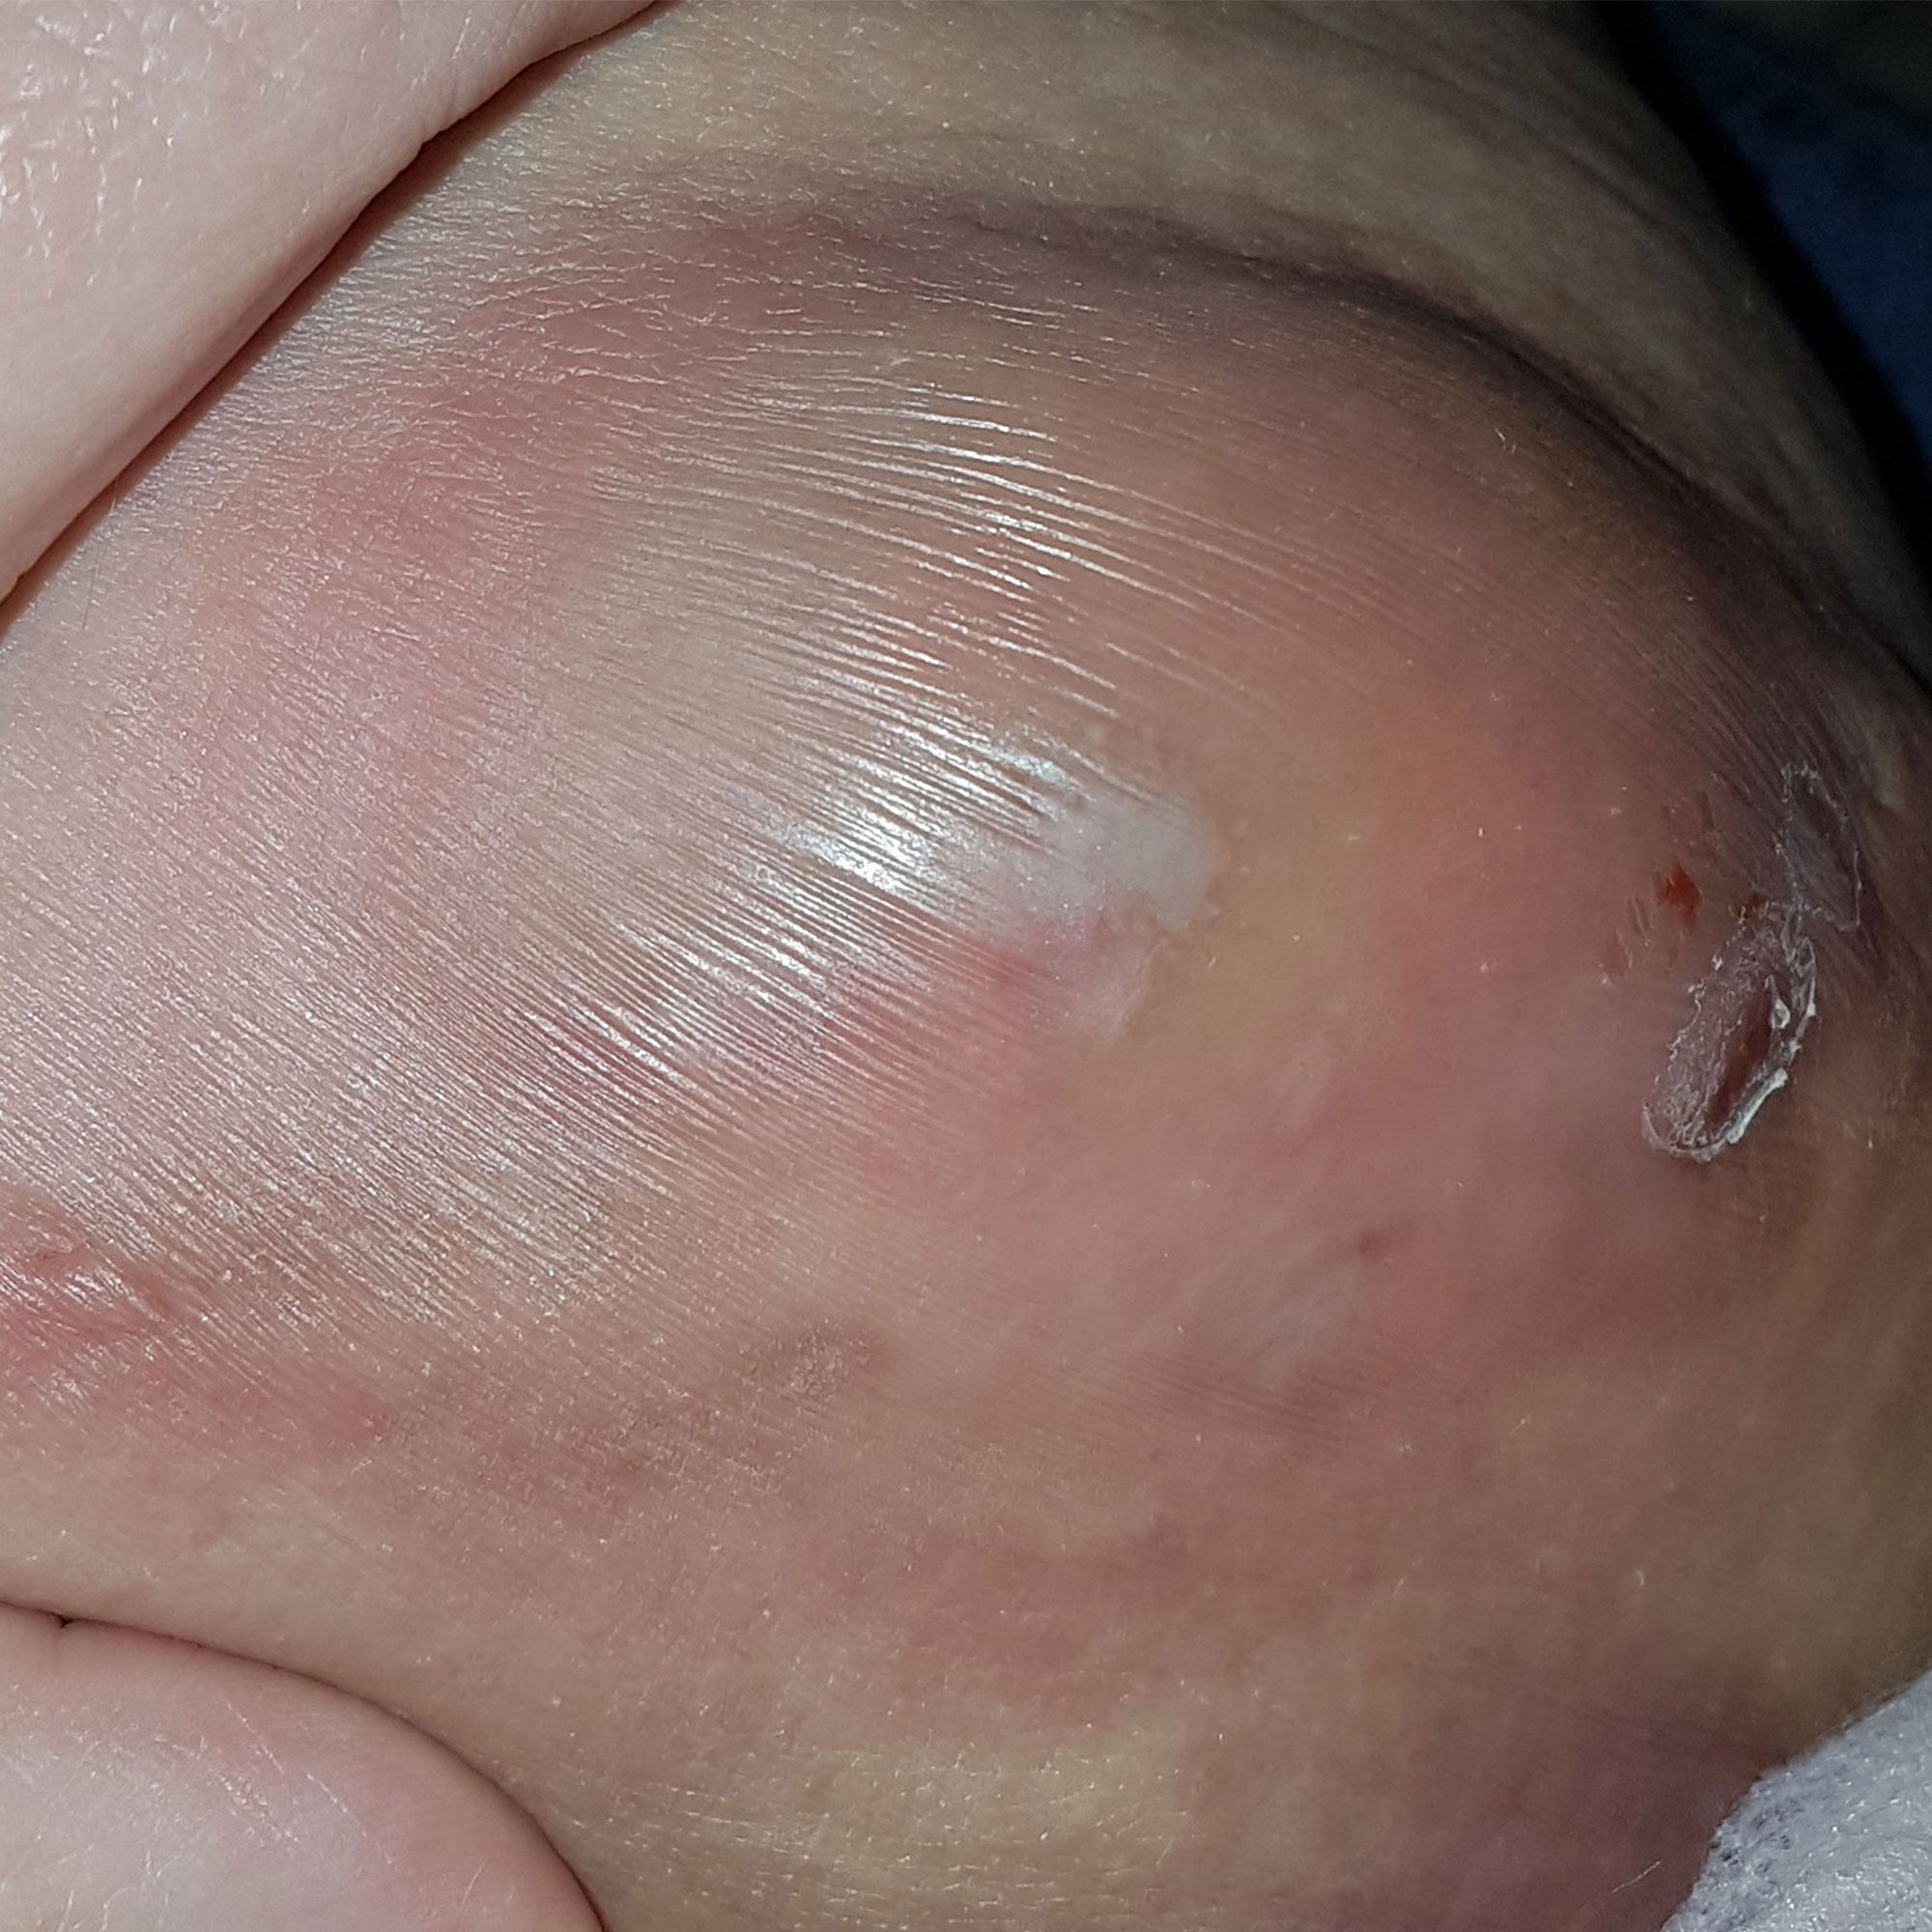 Painful Boils Under Armpits!Could it be Hidradenitis Suppurativa? 